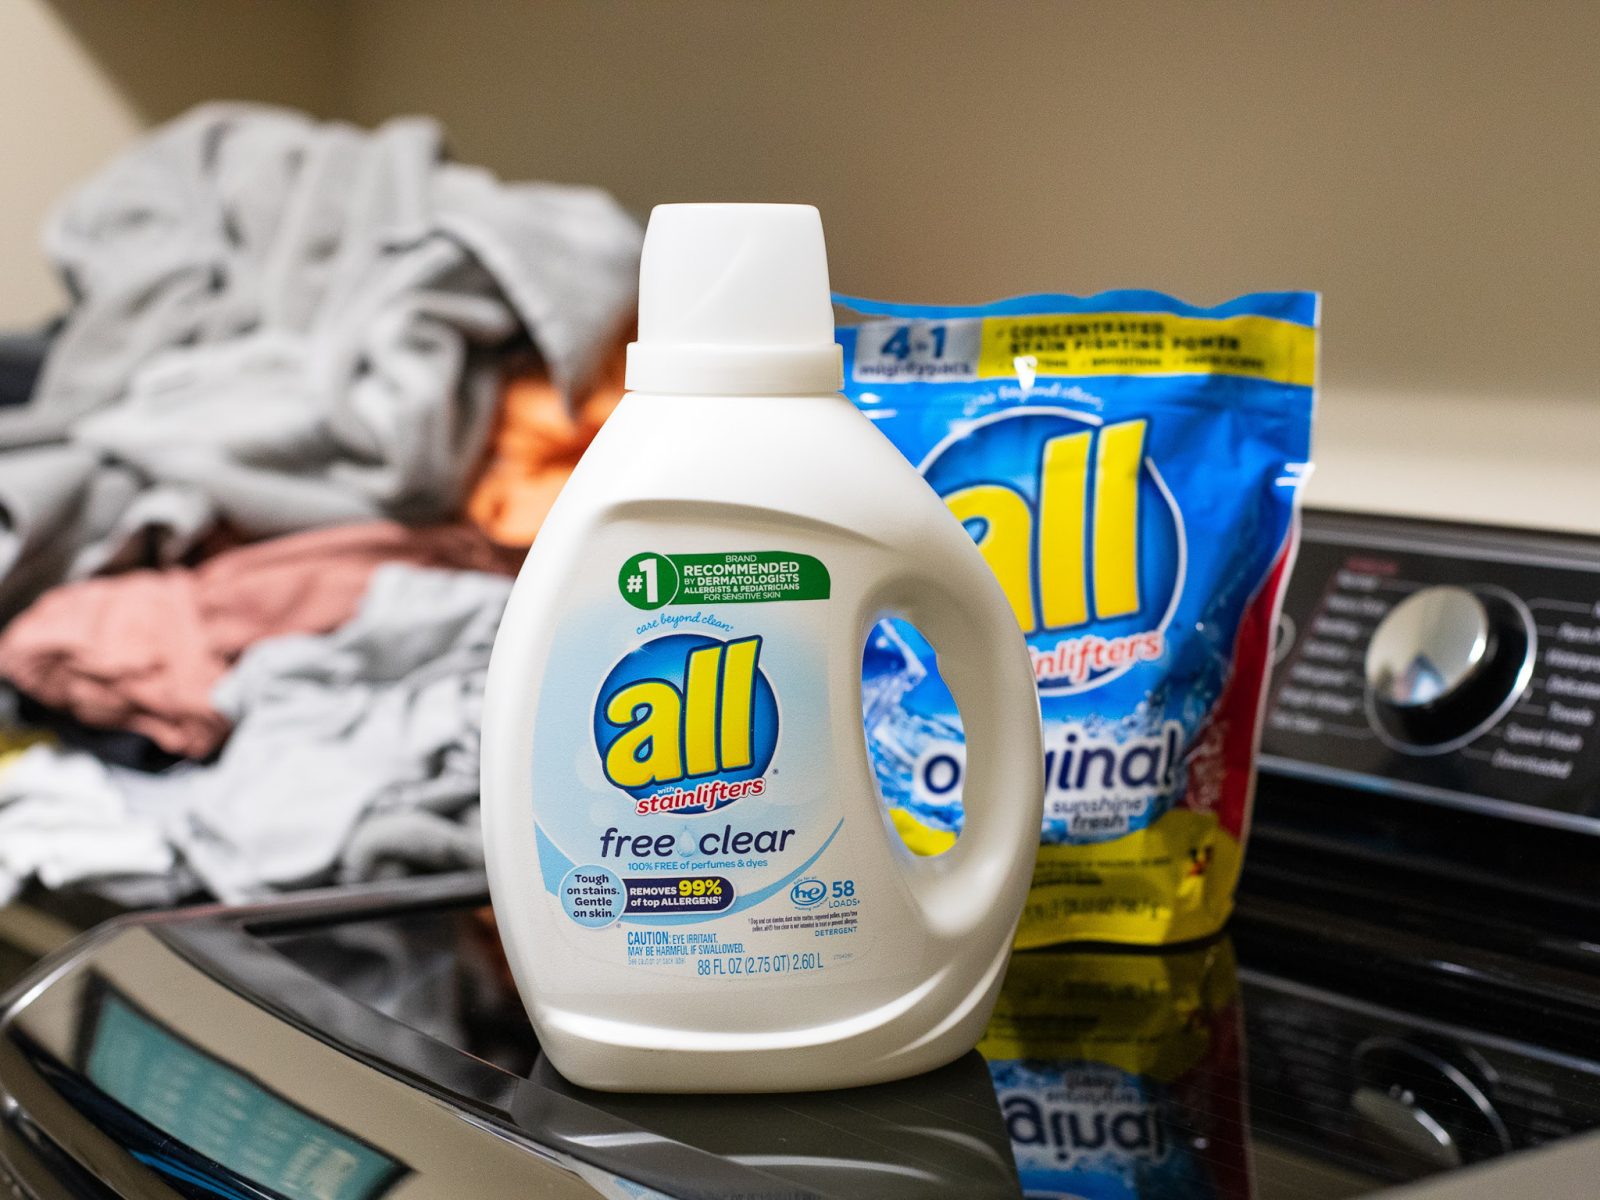 New All Laundry Detergent Coupon – Get the BIG Bottles As Low As $3.70 At Publix (Regular Price $11.39)